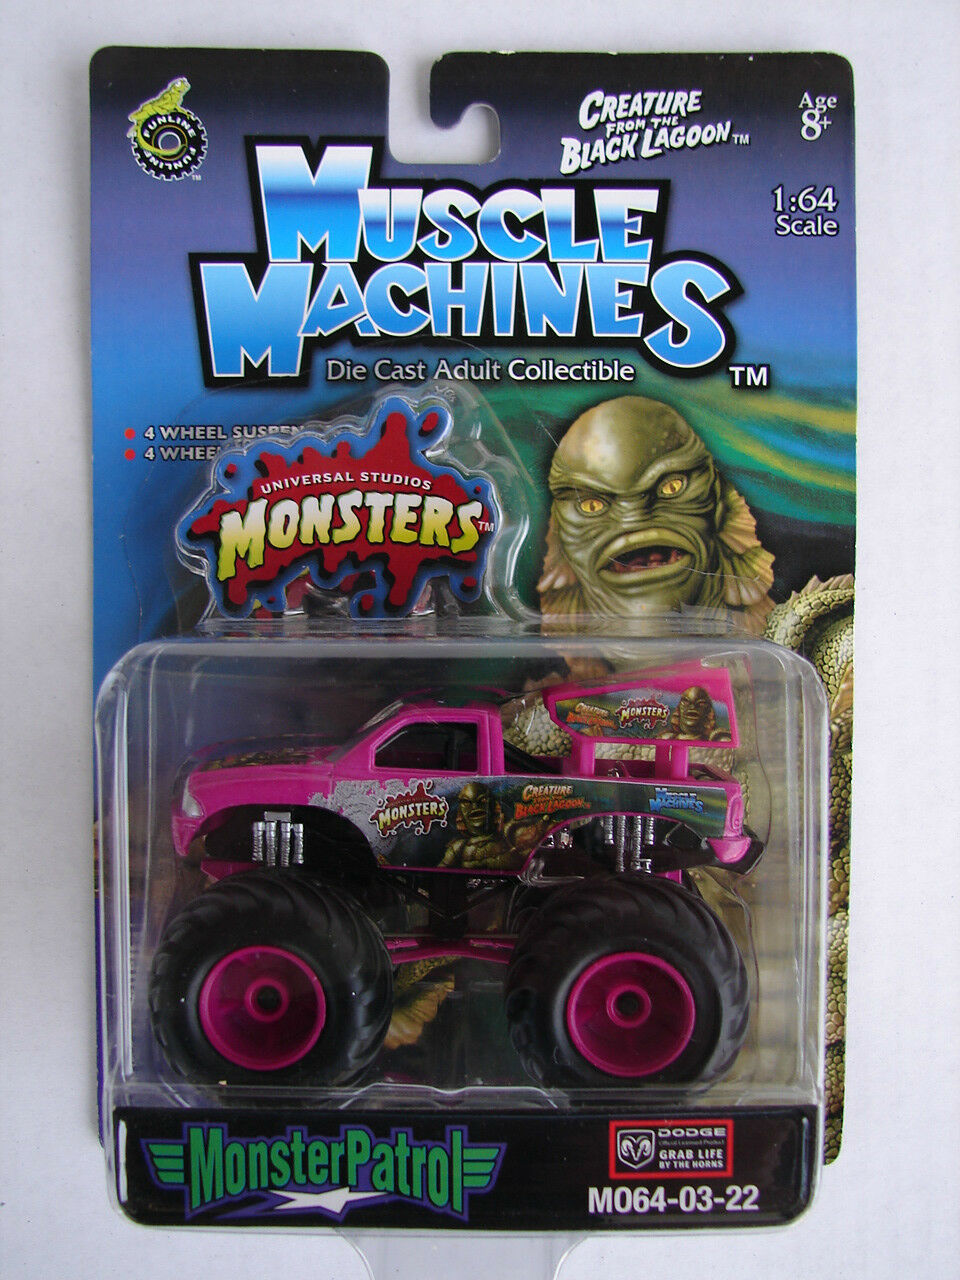 Creature-from-the-Black-Lagoon-monster-movies-36925880-948-533 - Universal  Monsters Universe